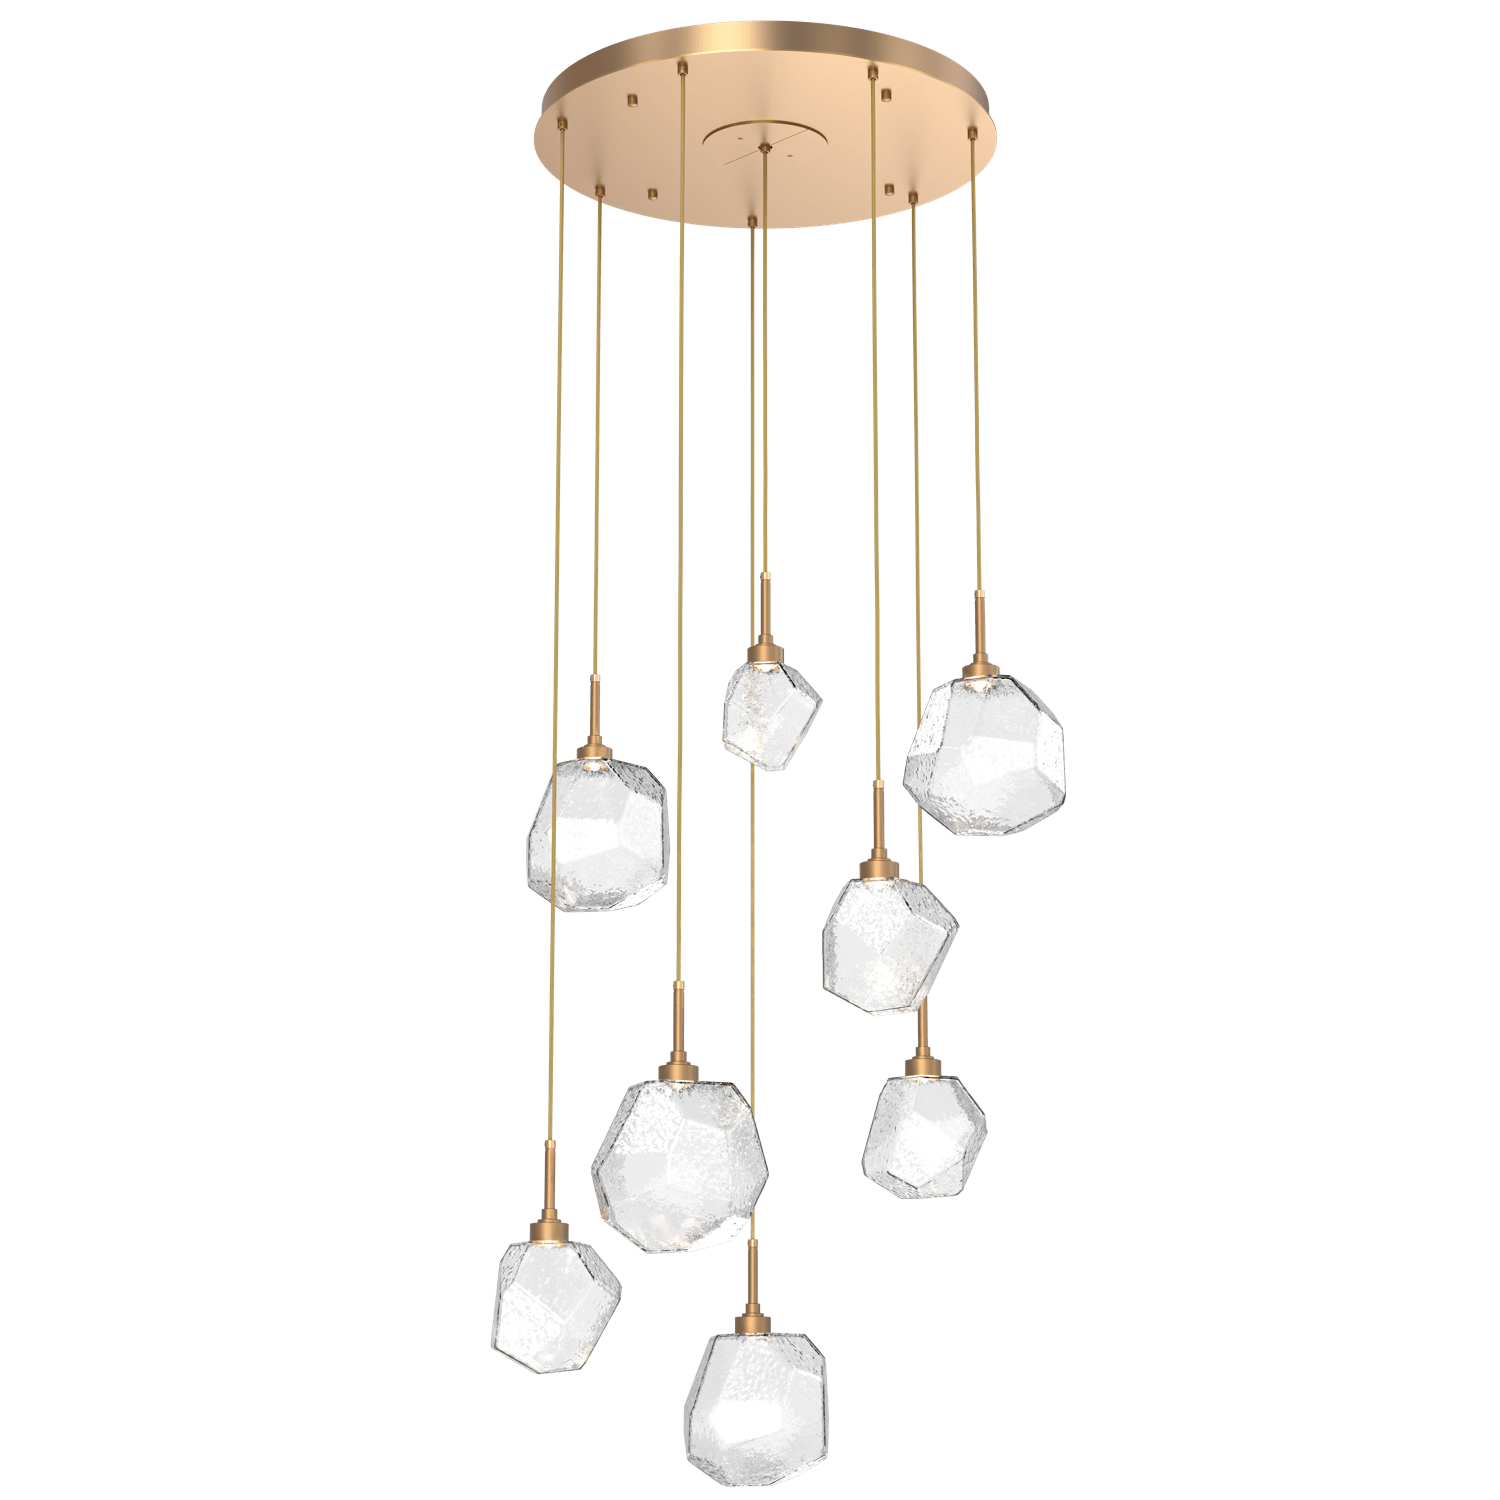 CHB0039-08-NB-C-Hammerton-Studio-Gem-8-light-round-pendant-chandelier-with-novel-brass-finish-and-clear-blown-glass-shades-and-LED-lamping